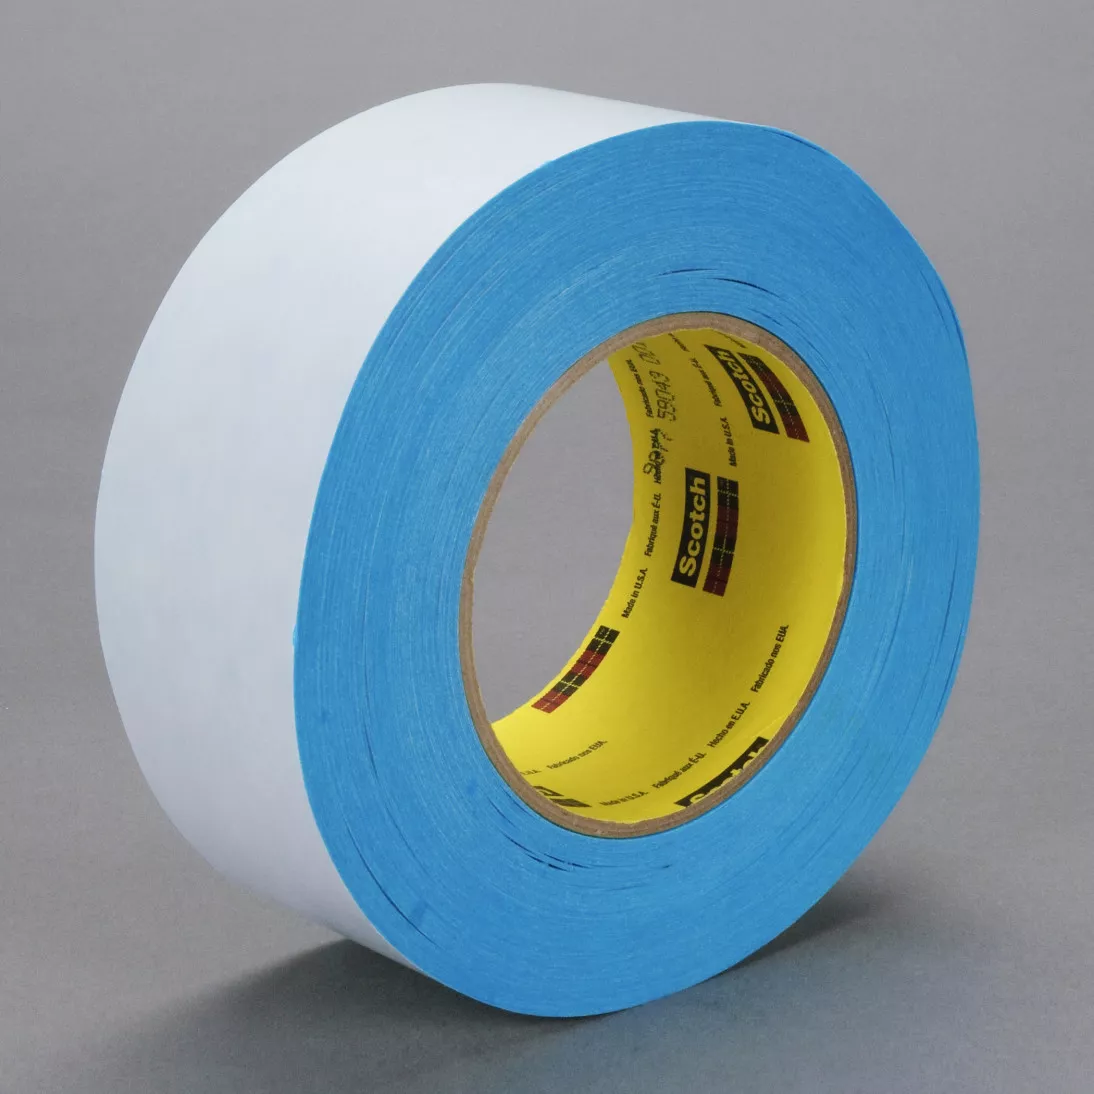 3M™ Repulpable Double Coated Flying Splice Tape High Strength 9977,
Blue, 48 mm x 33 m, 4 mil, 24 rolls per case